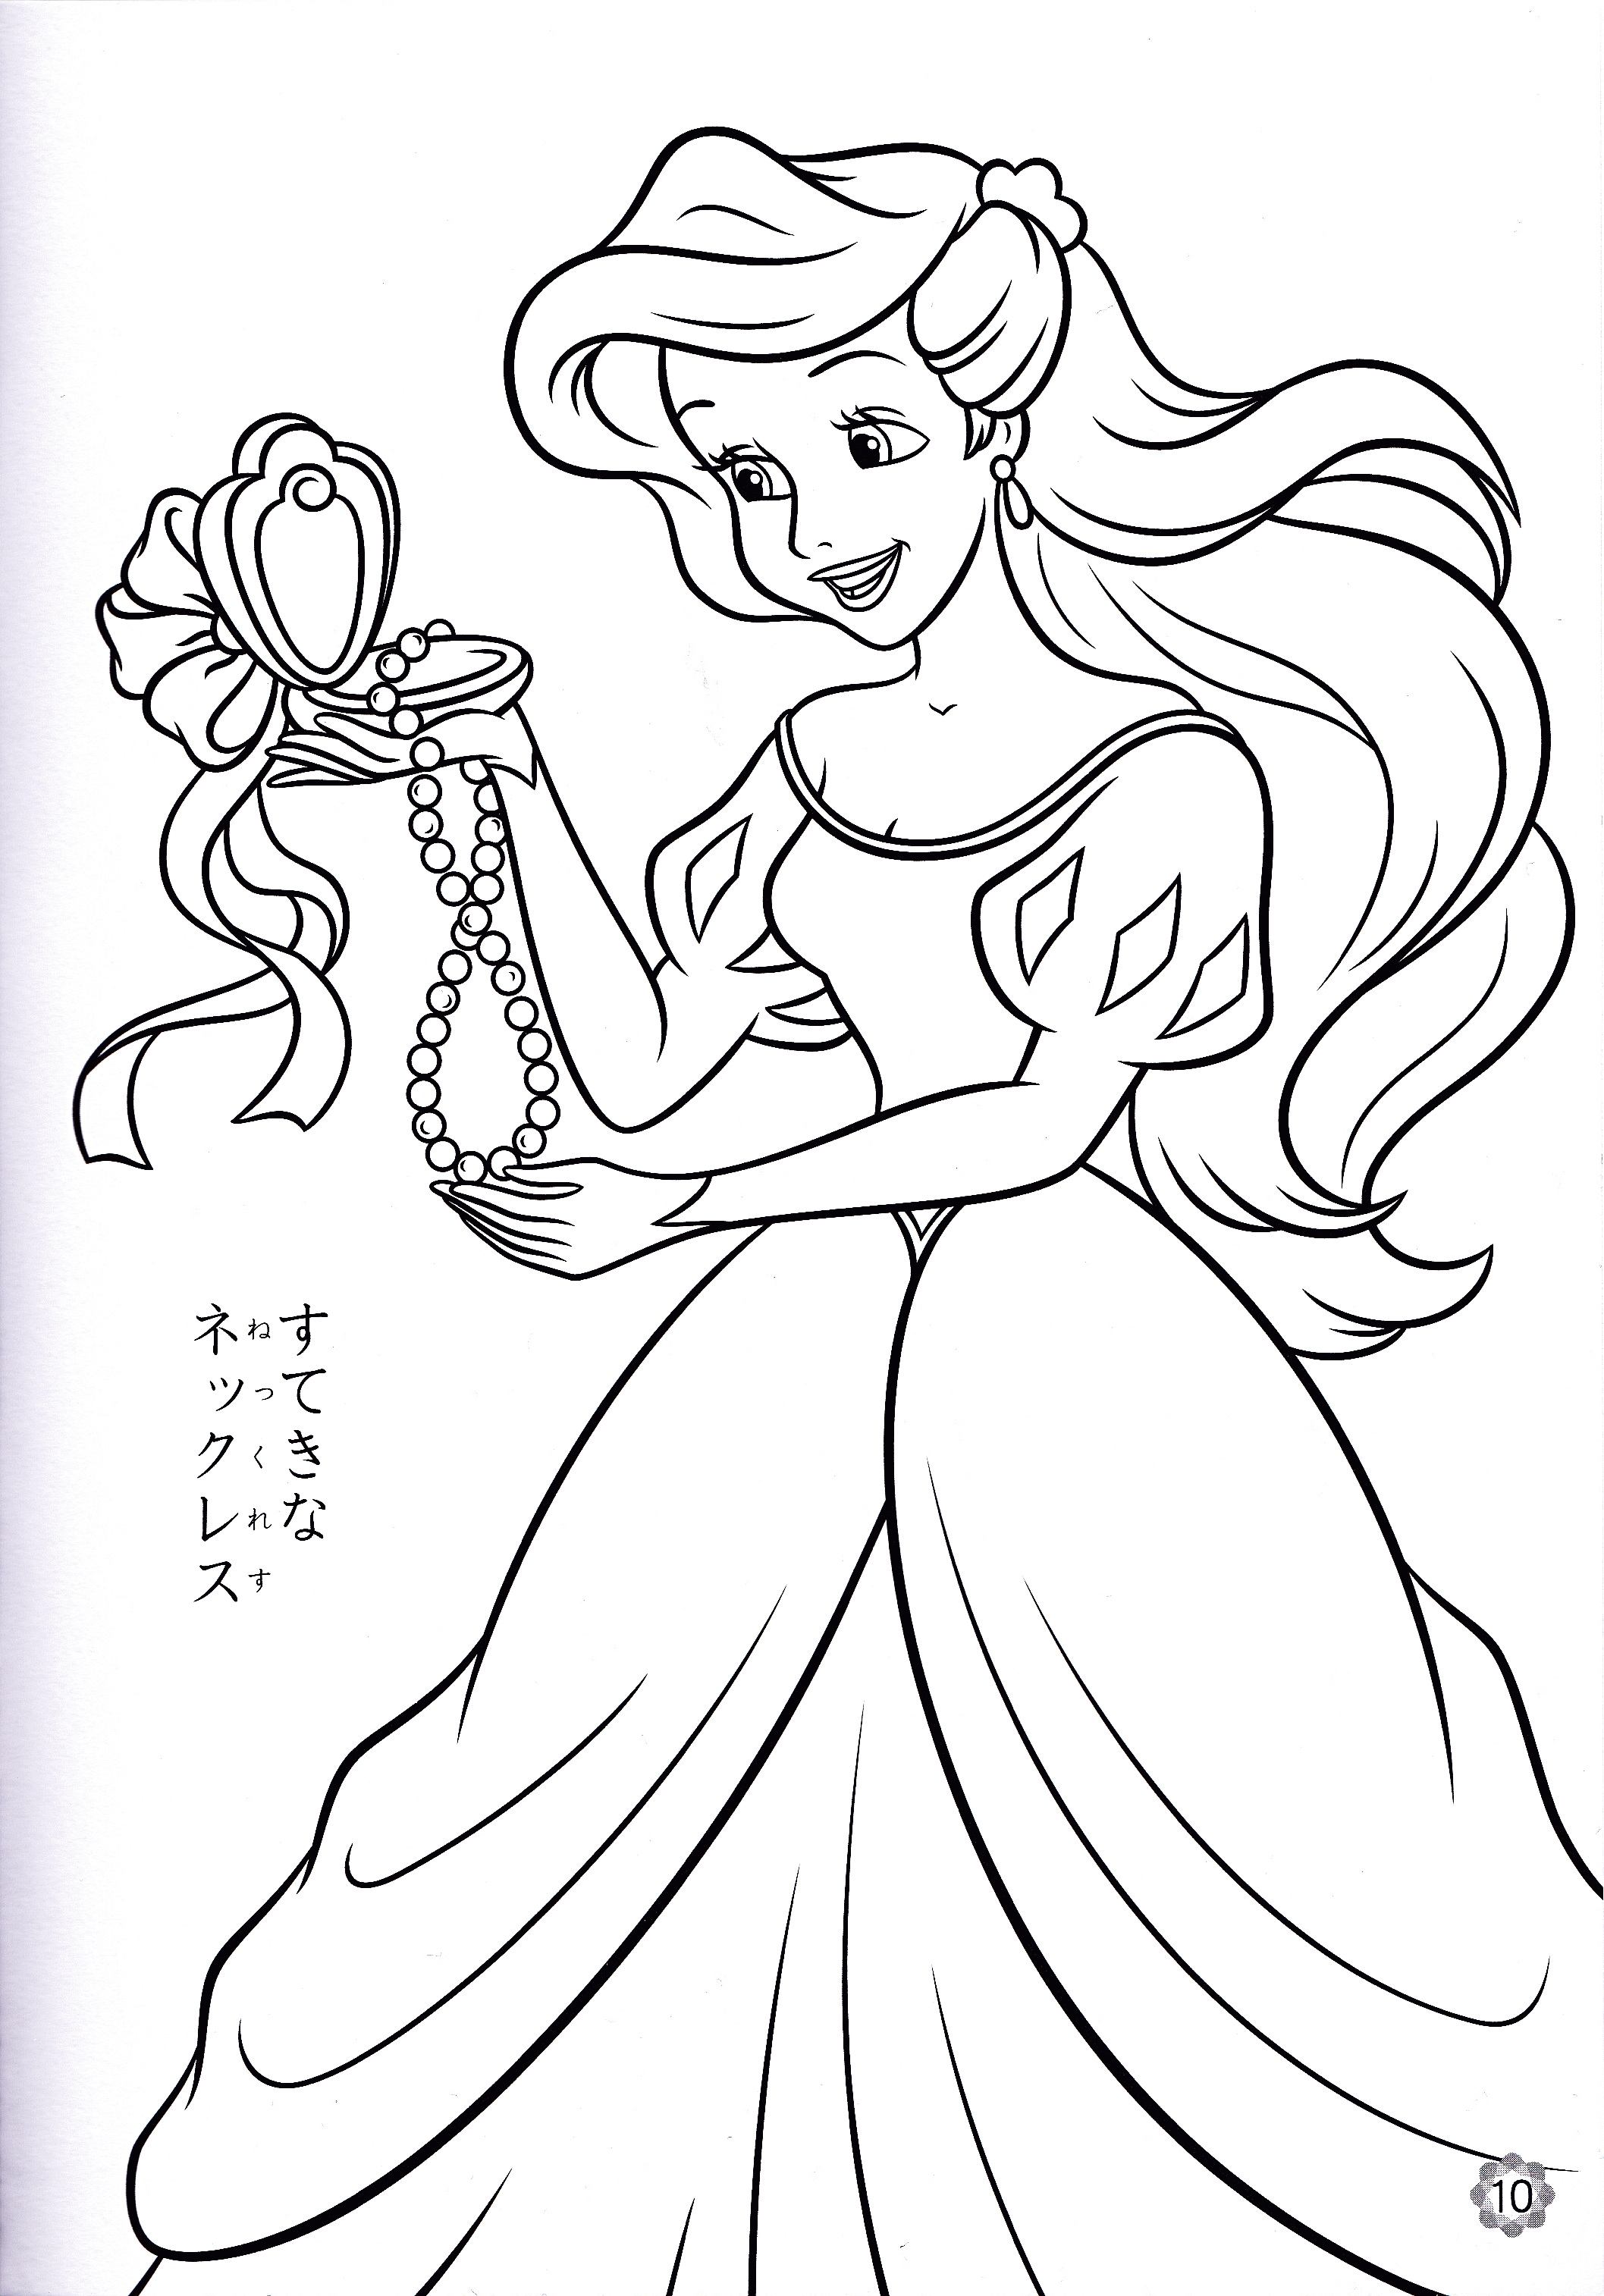 Coloring Pages Of Cartoon Princesses - Coloring Home